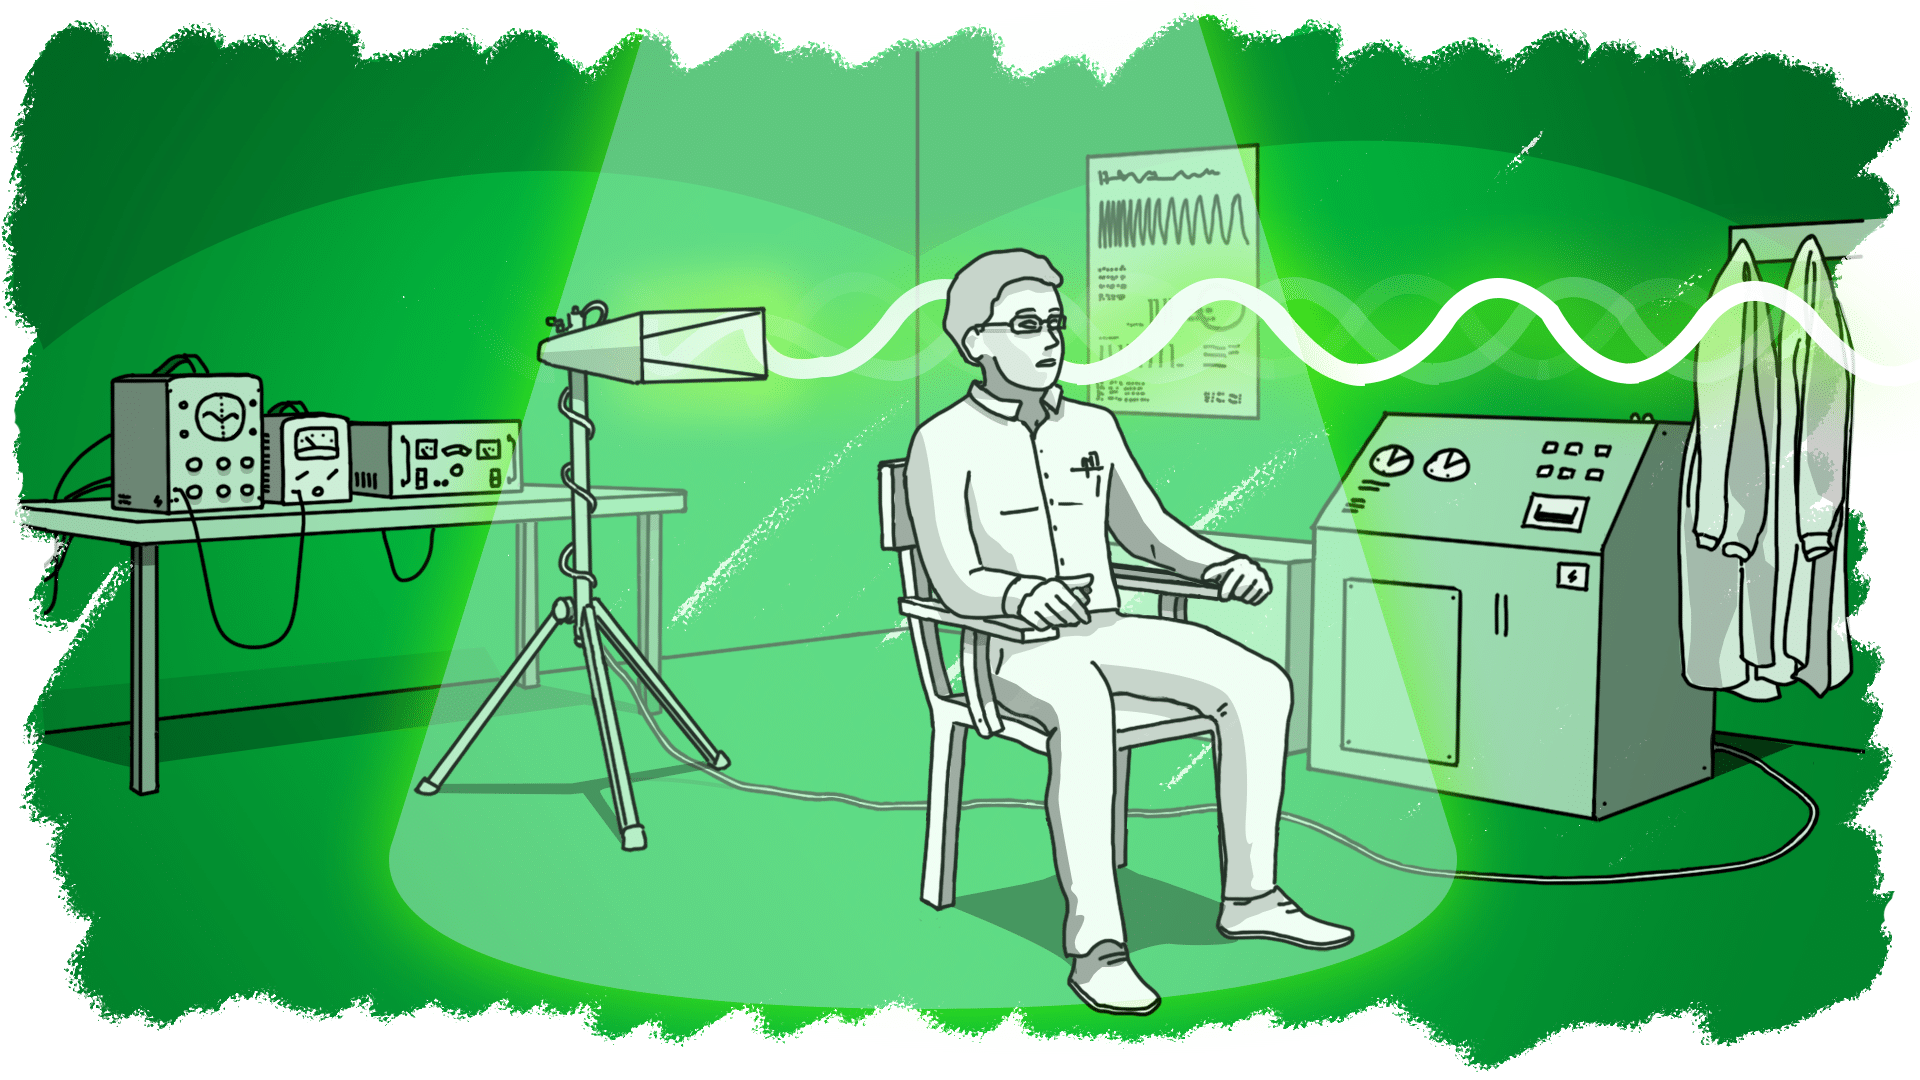 Illustration of man undergoing an experiment on his brain